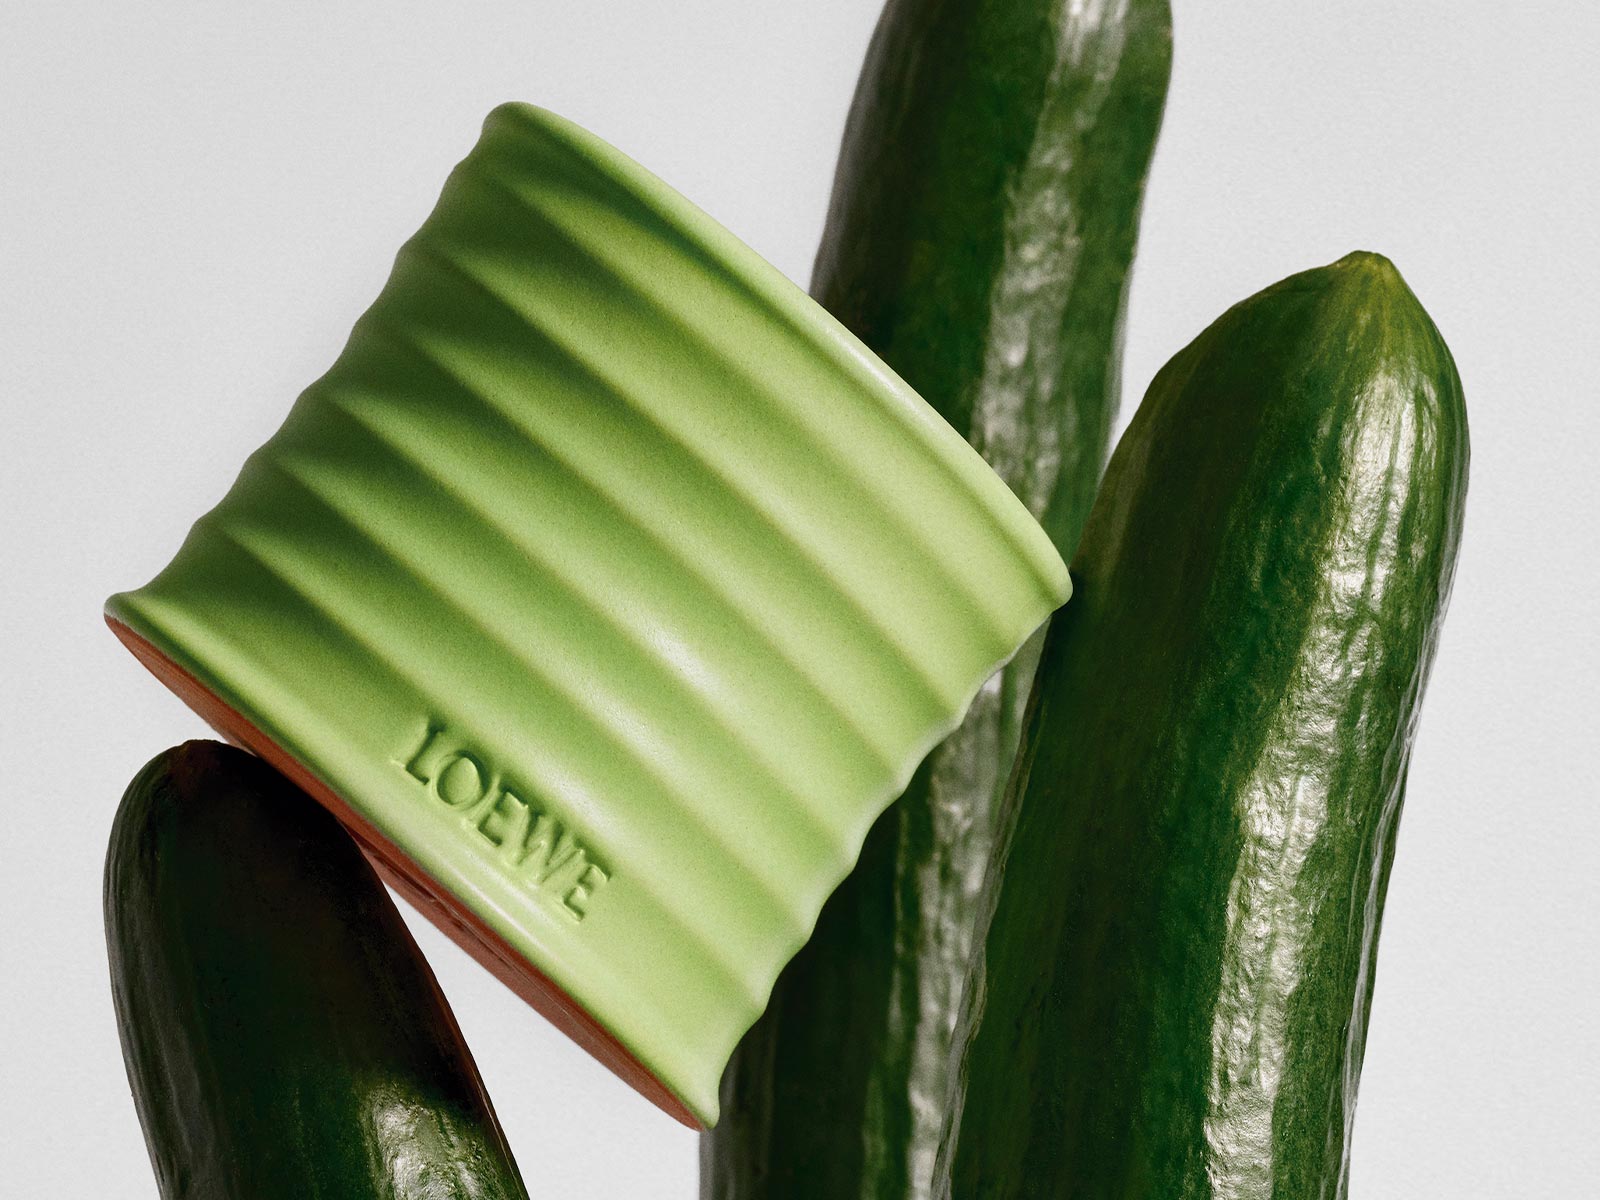 LOEWE launches new cucumber candle by Leo Wu